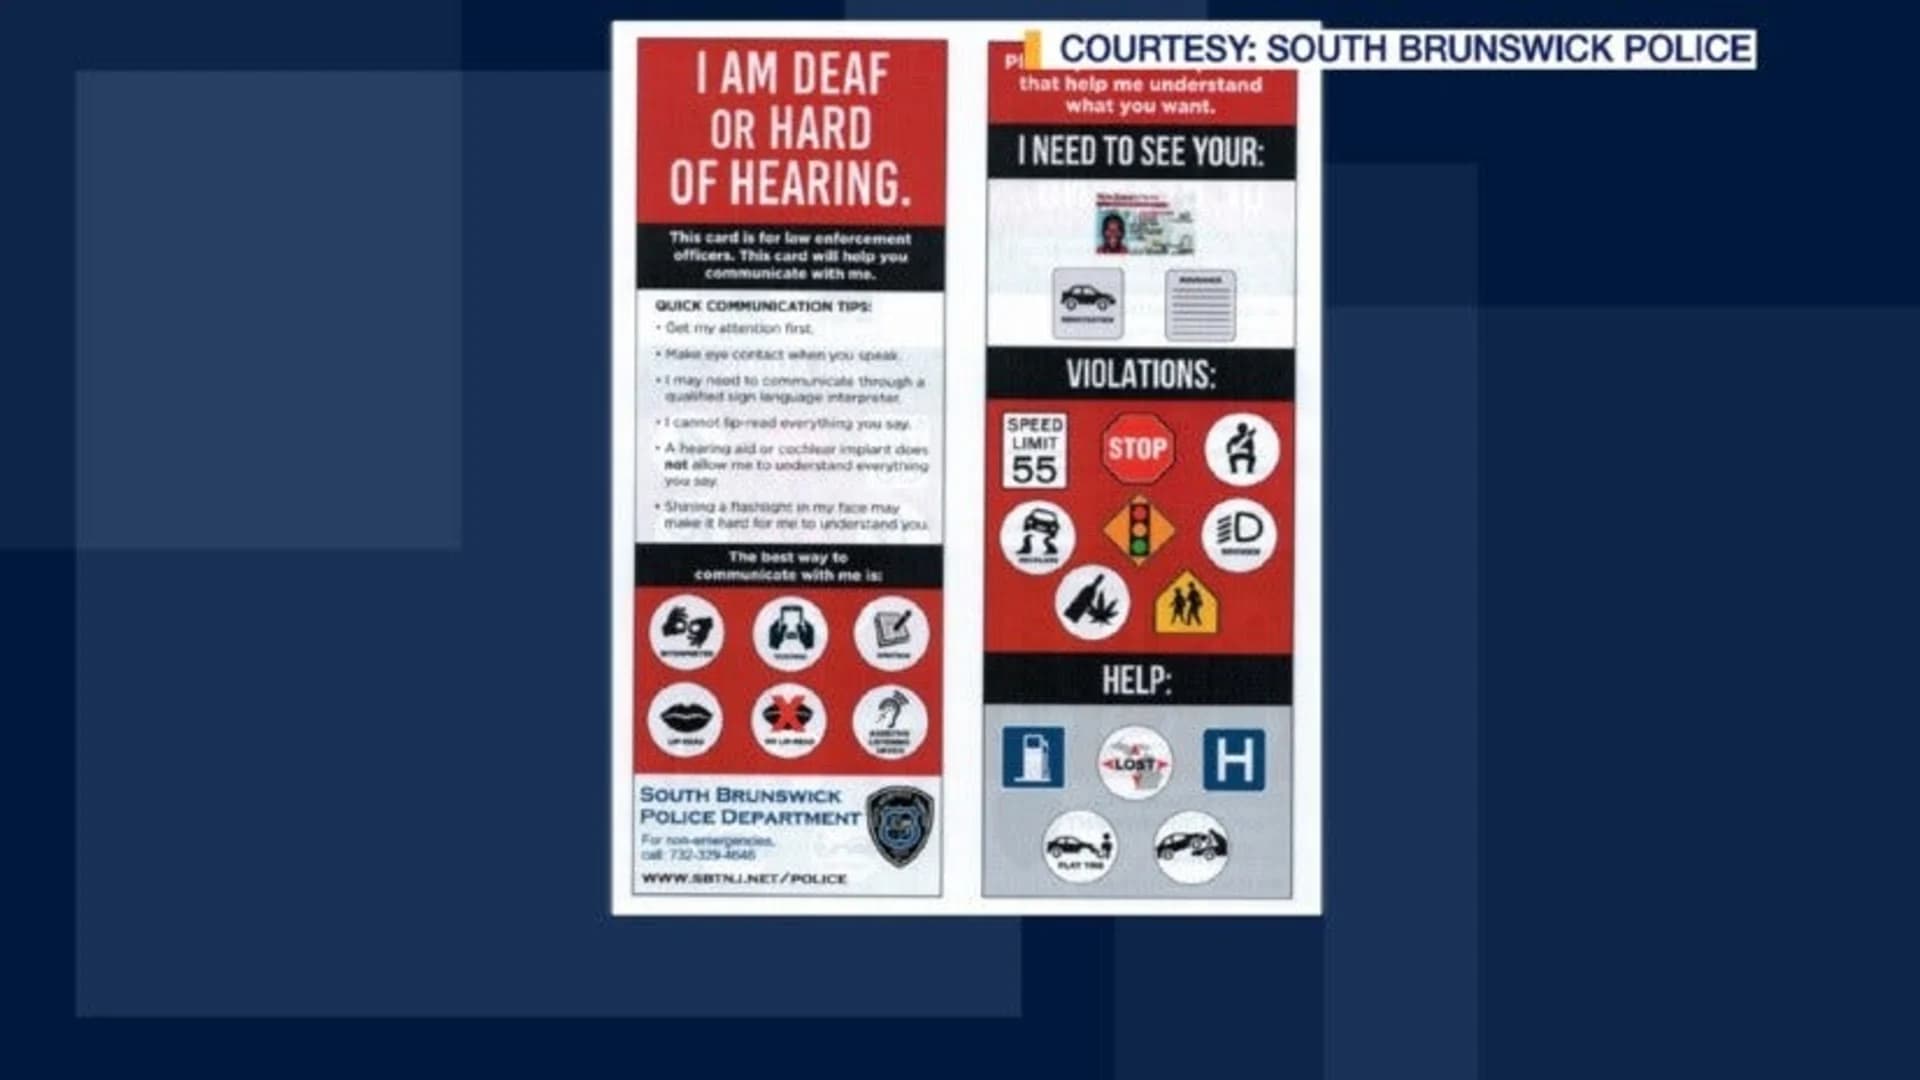 Police unveil card to ease communication with deaf person